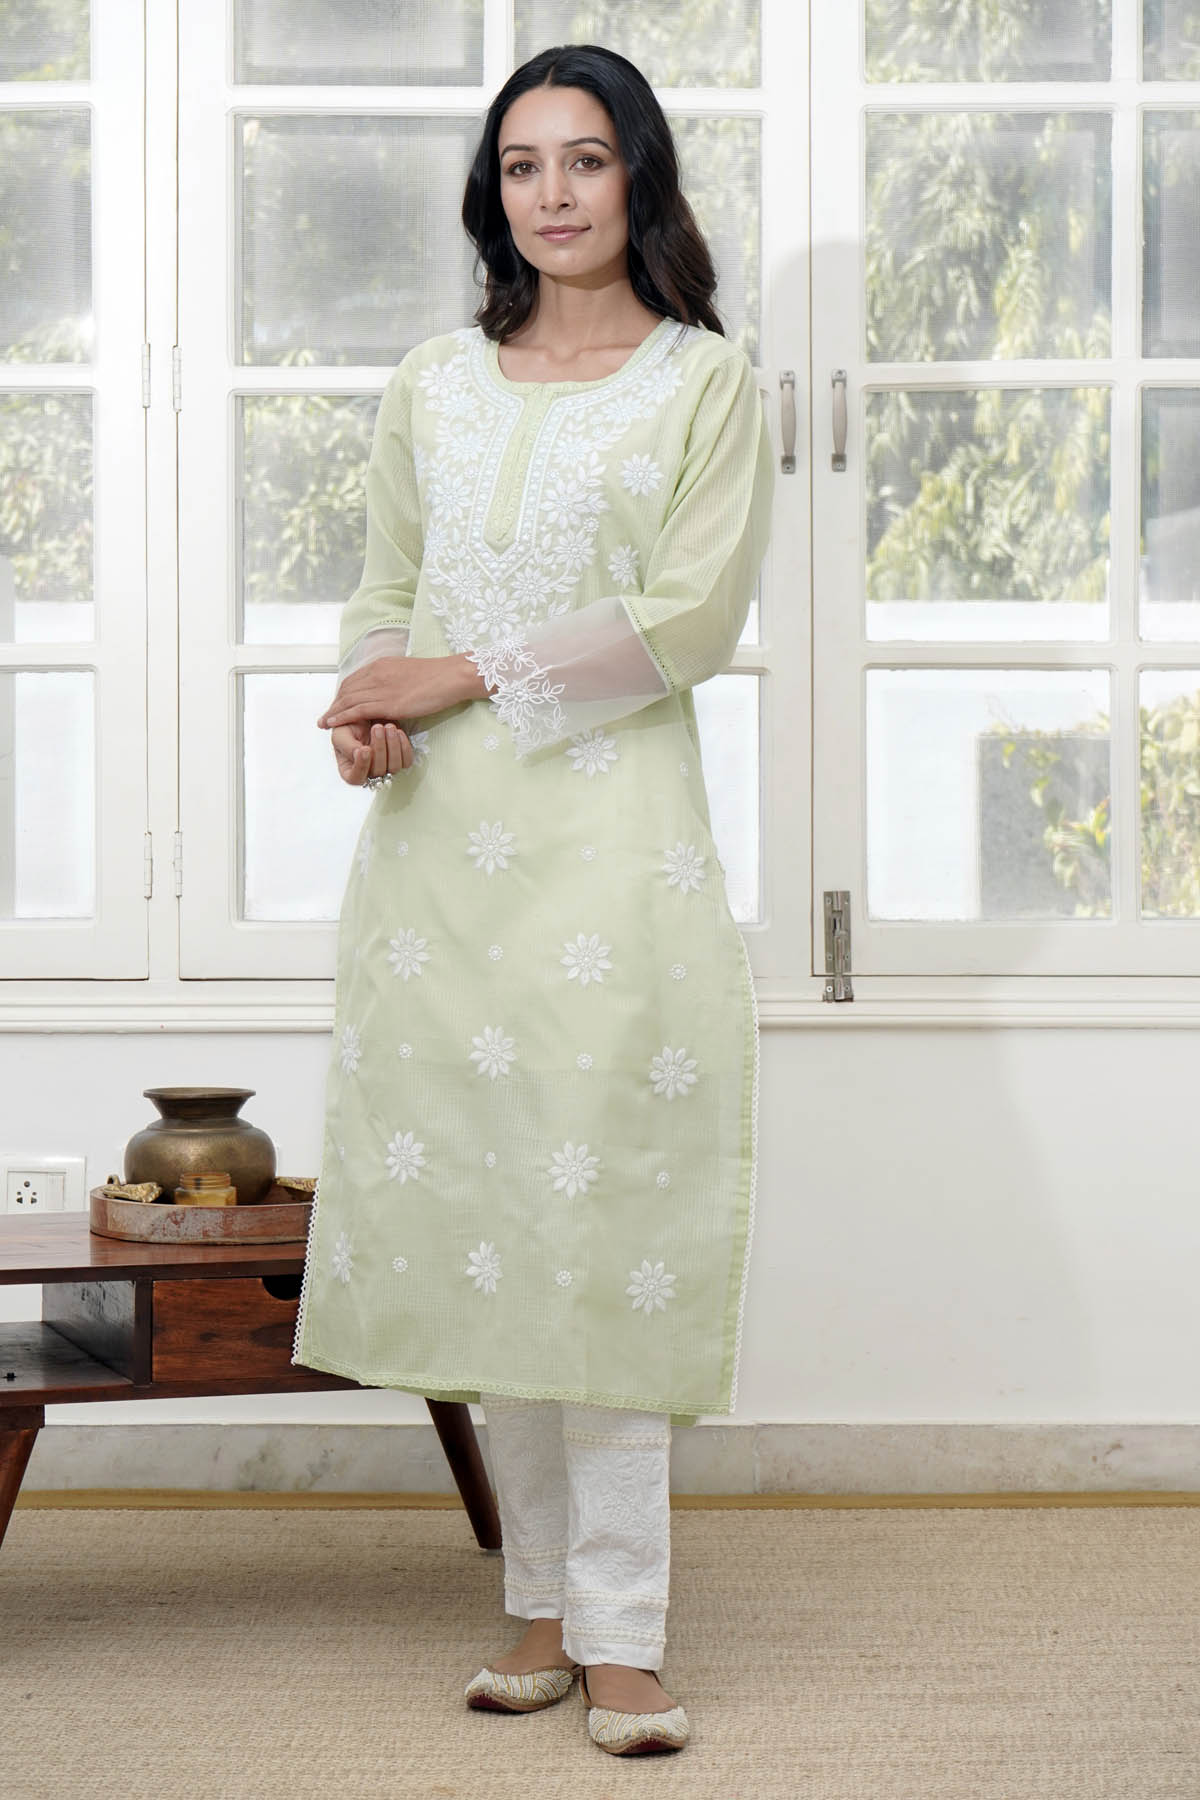 Nero Mint Green Embroidered Kurta for women online at ScrollnShops